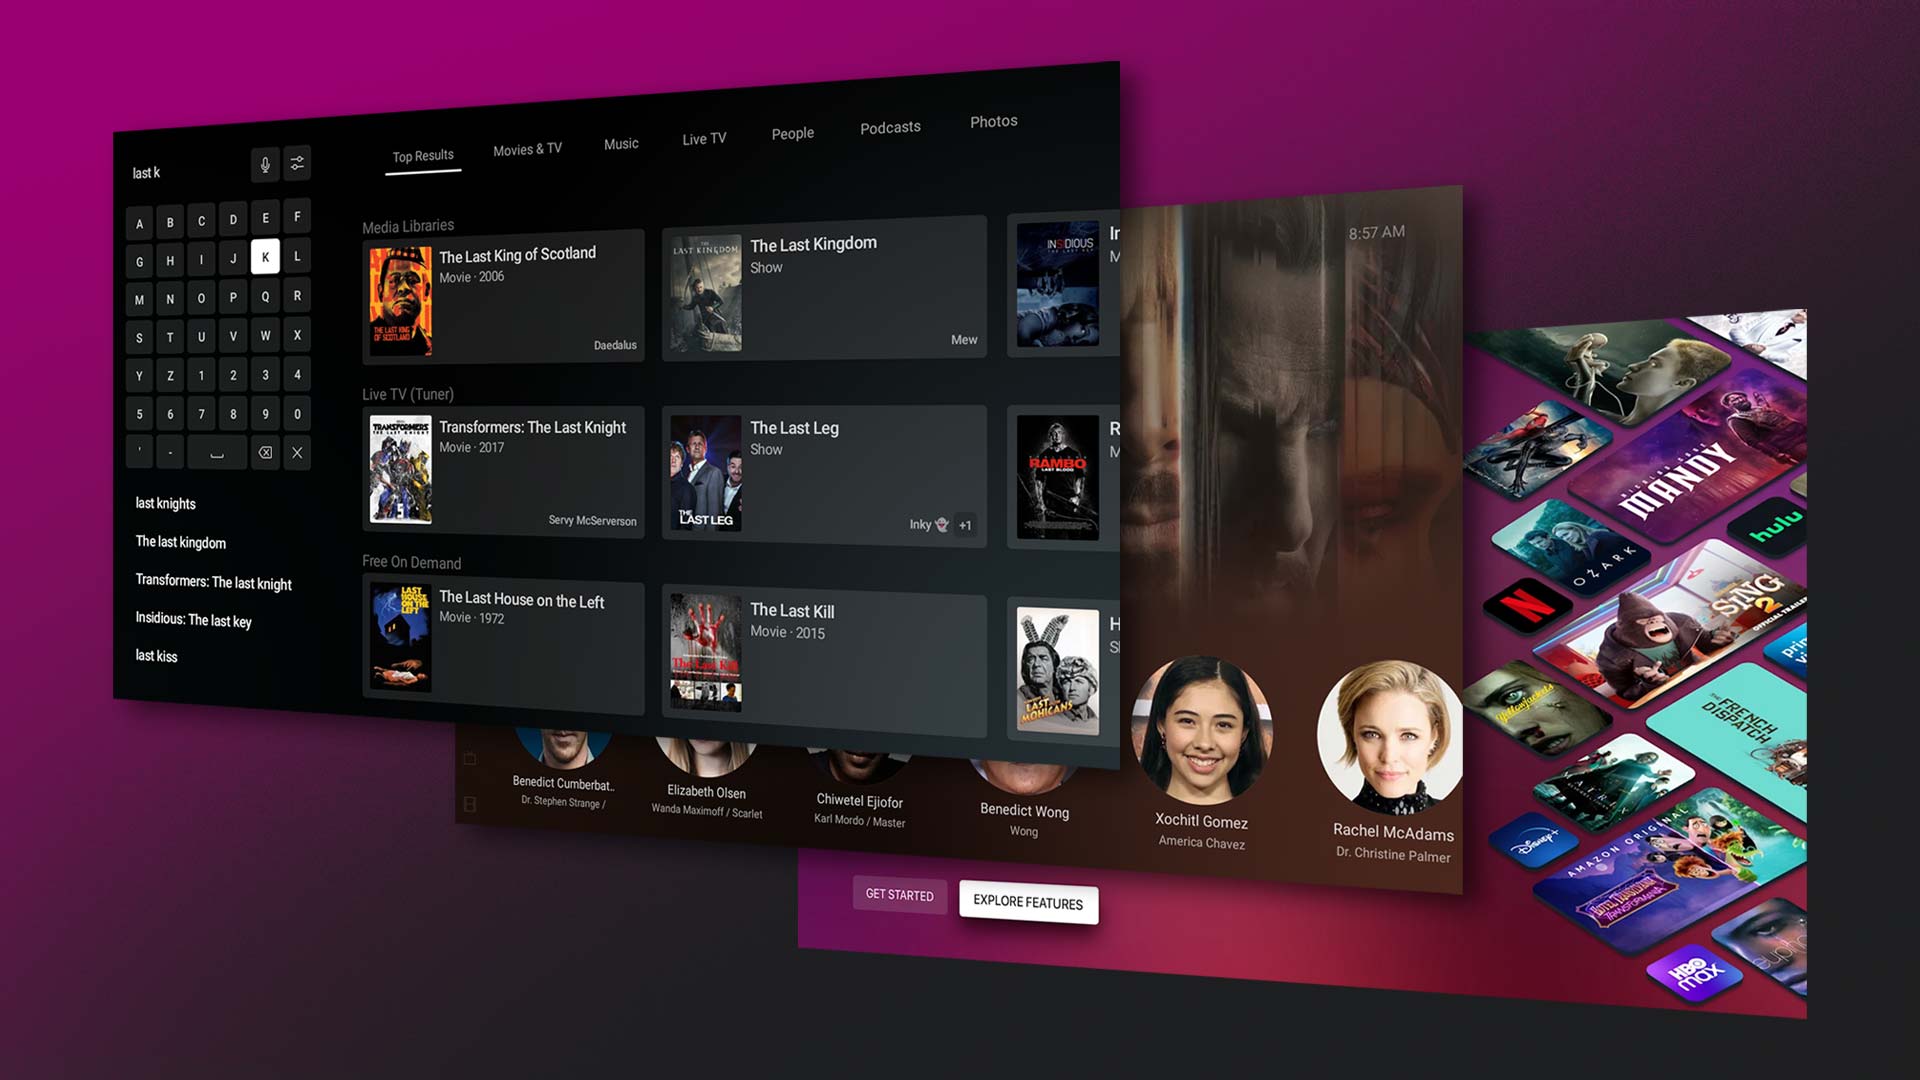 Plex unveils a one-stop streaming guide for Netflix, Hulu, and